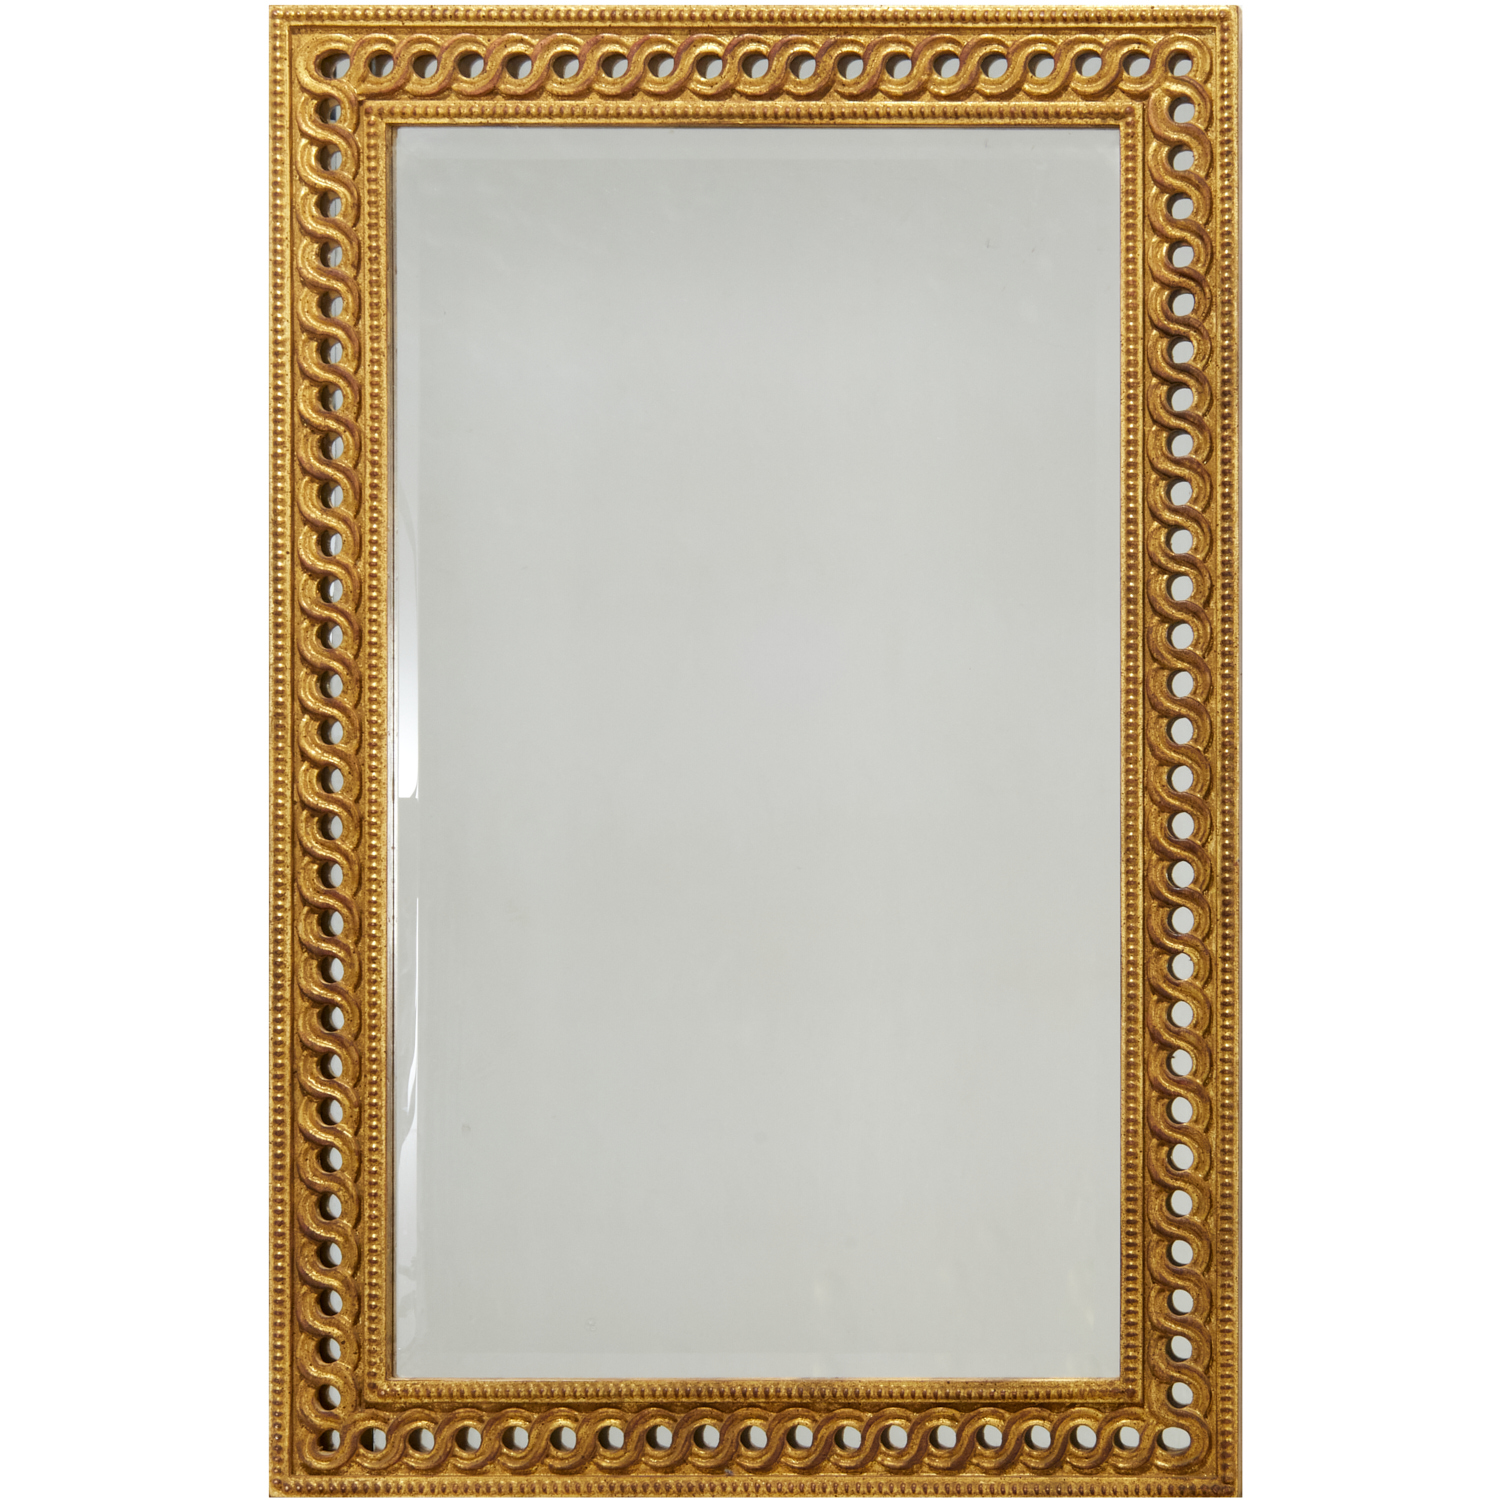 NEO-CLASSICAL STYLE GILT WALL MIRROR